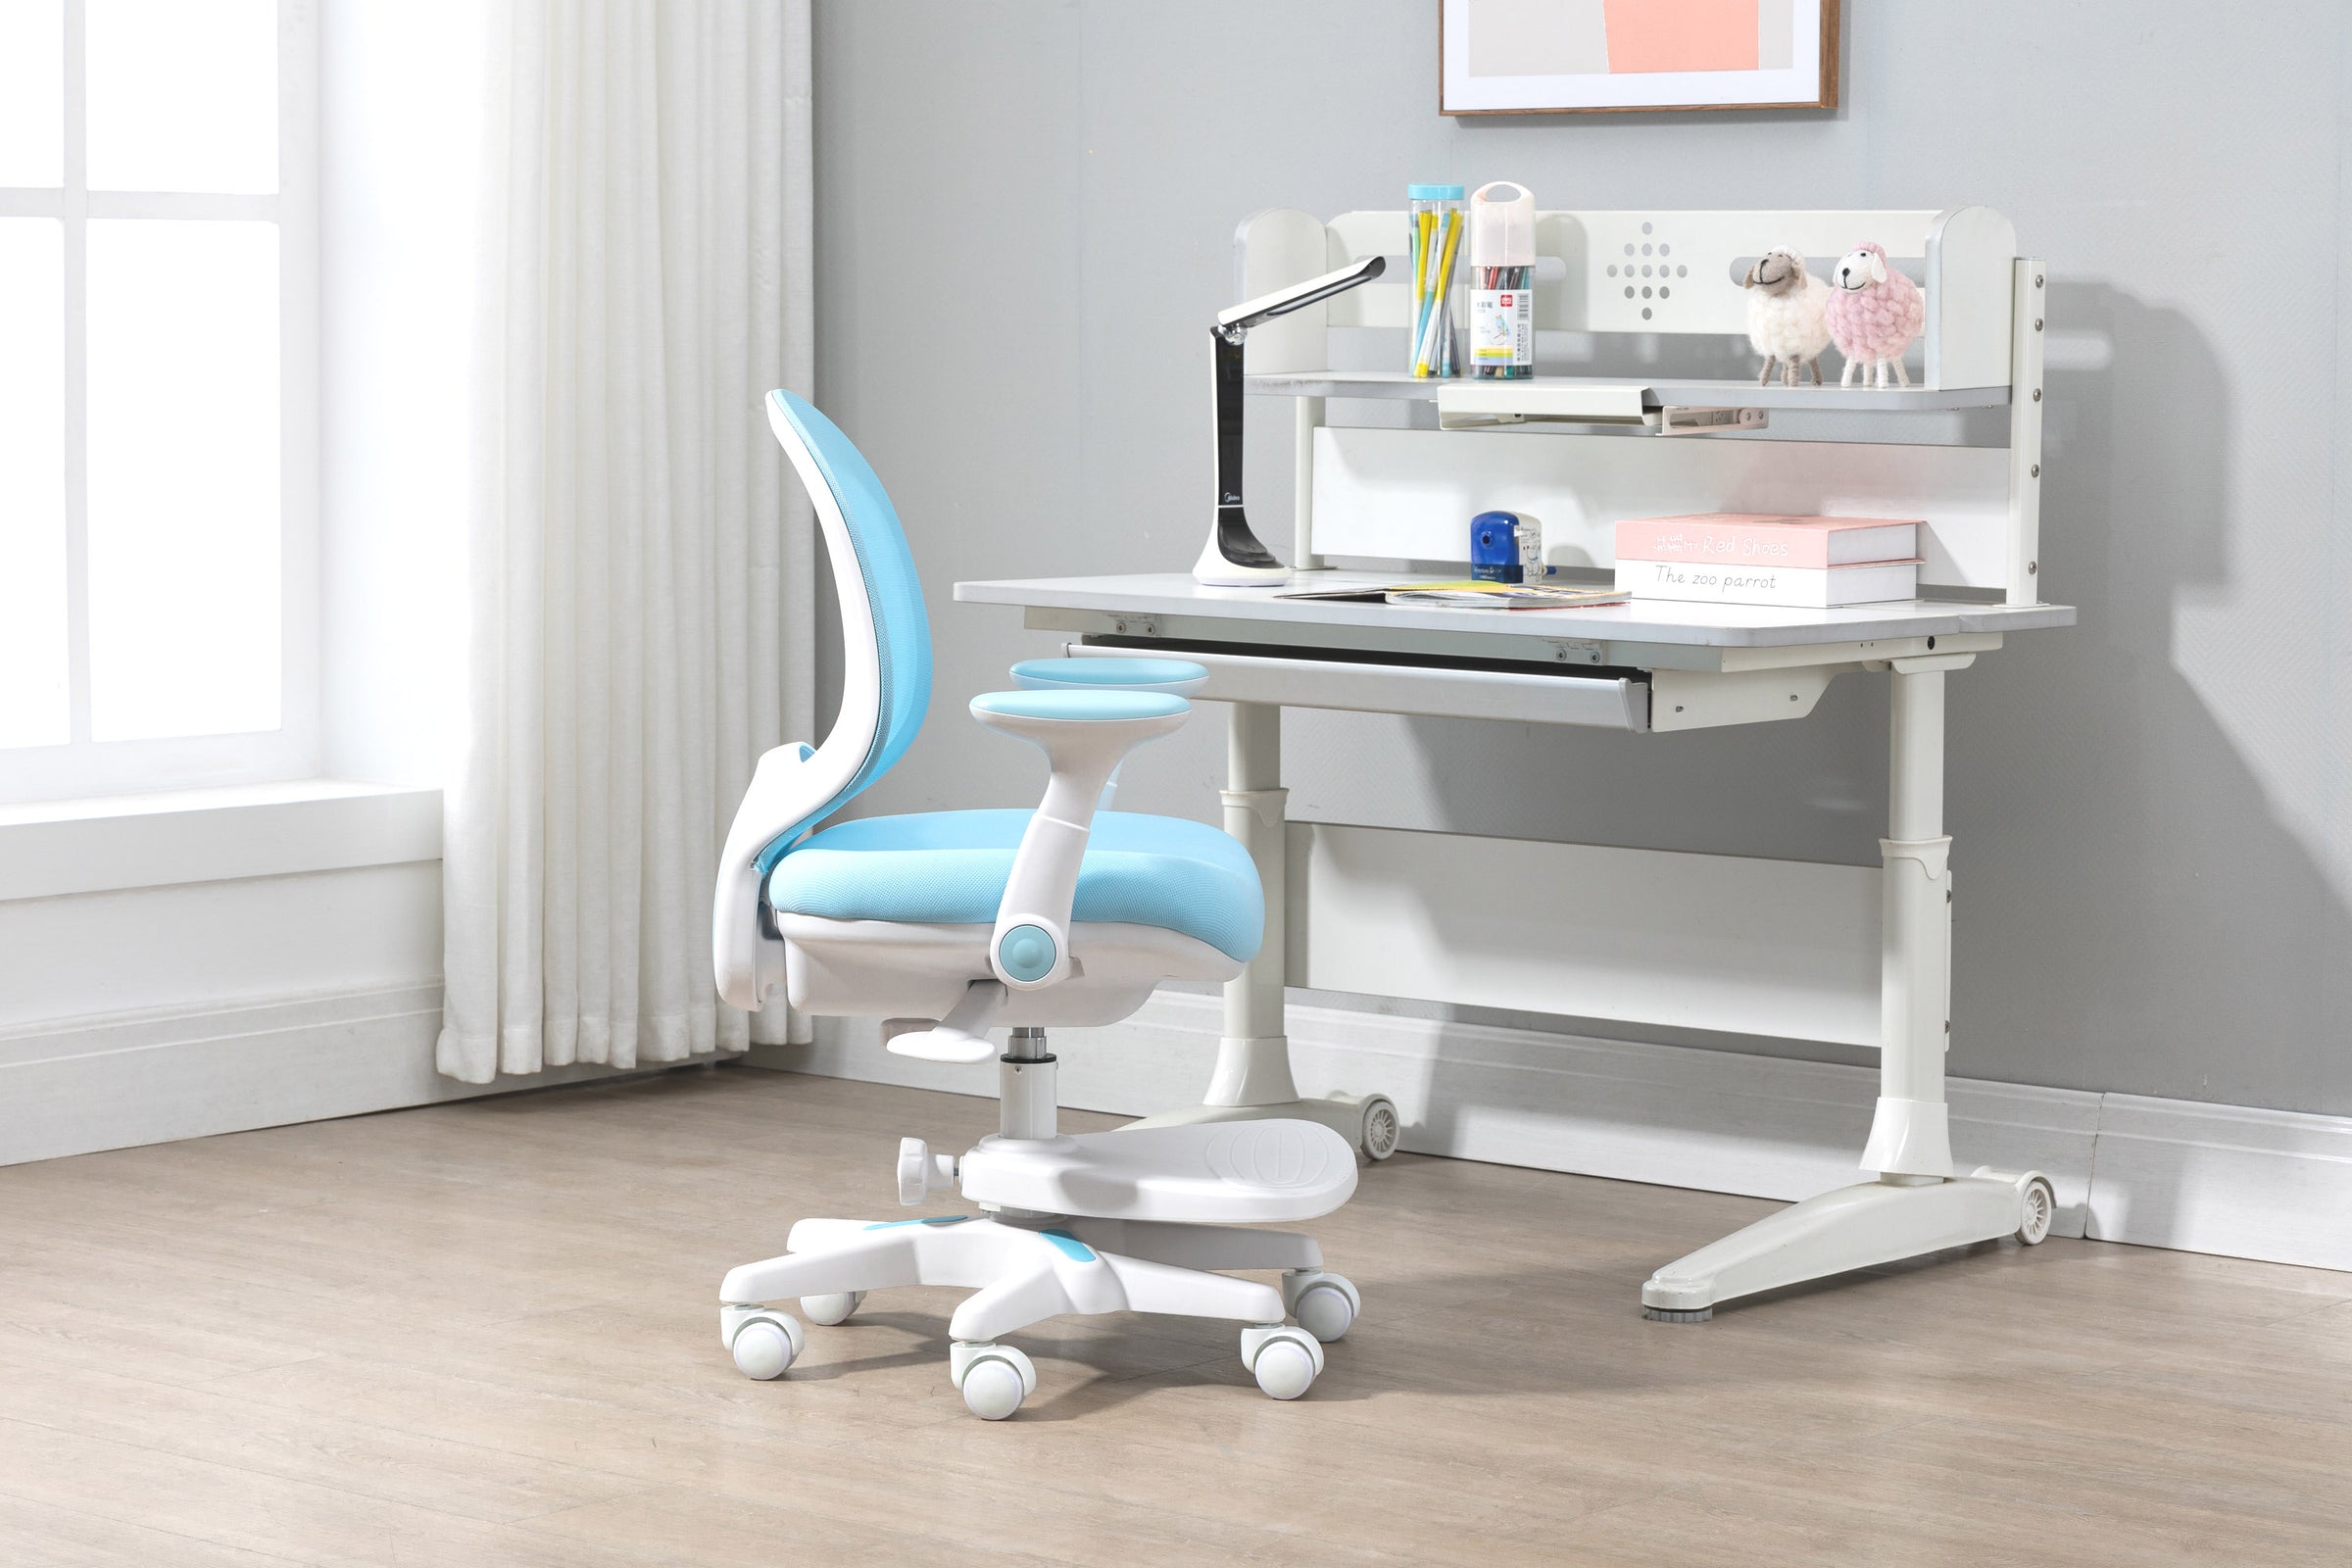 https://www.kzchair.com/cdn/shop/collections/High-Quality-Adjustable-Ergonomic-Reading-Table-Kids-Study-Desk-and-Chair.jpg?v=1671182777&width=2400